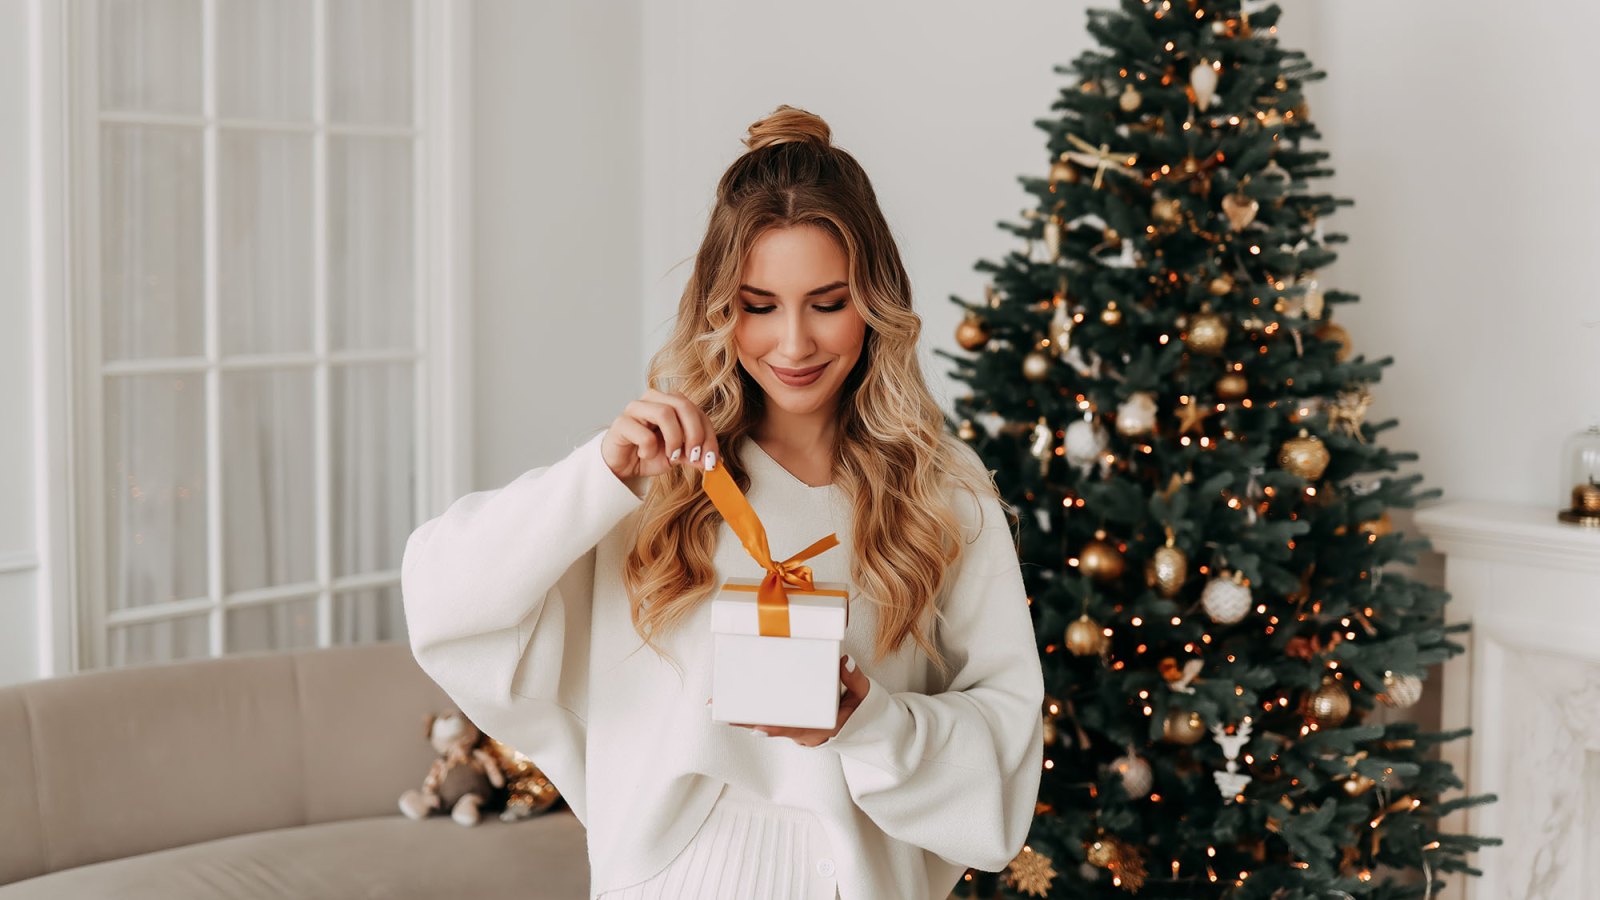 The concept of Christmas. Portrait of a smiling young woman with curly hair in a knitted sweater holding and opening a Christmas gift on the background of a Christmas tree in a bright interior on a holiday at home